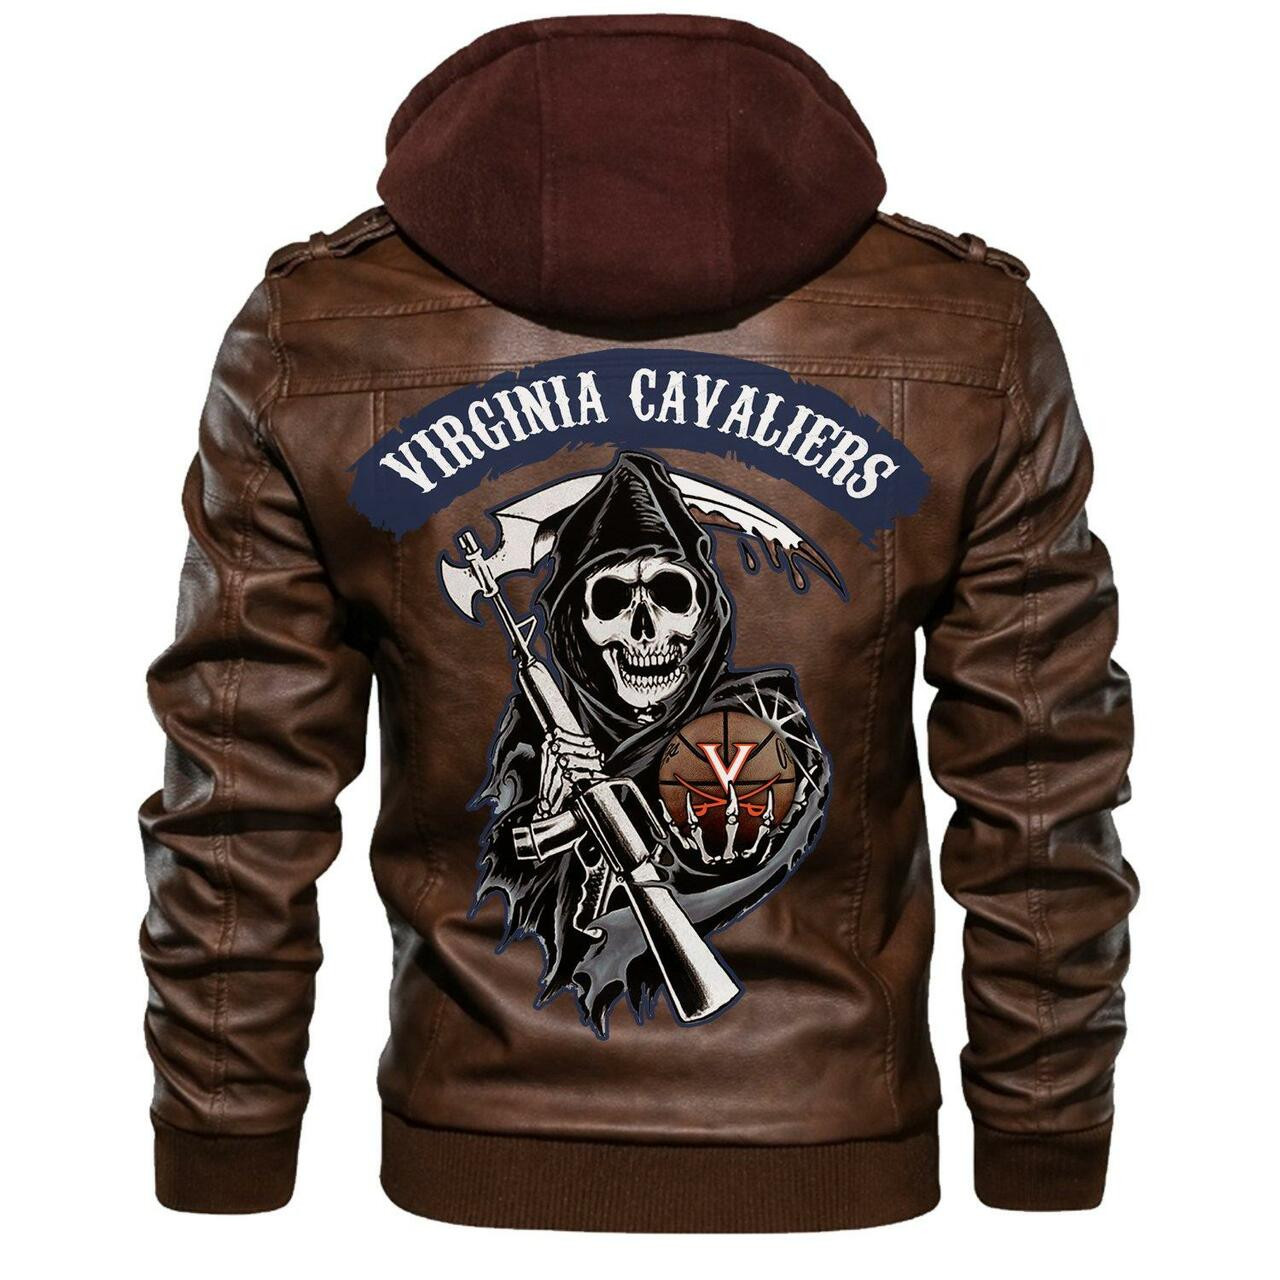 Our store has all of the latest leather jacket 91